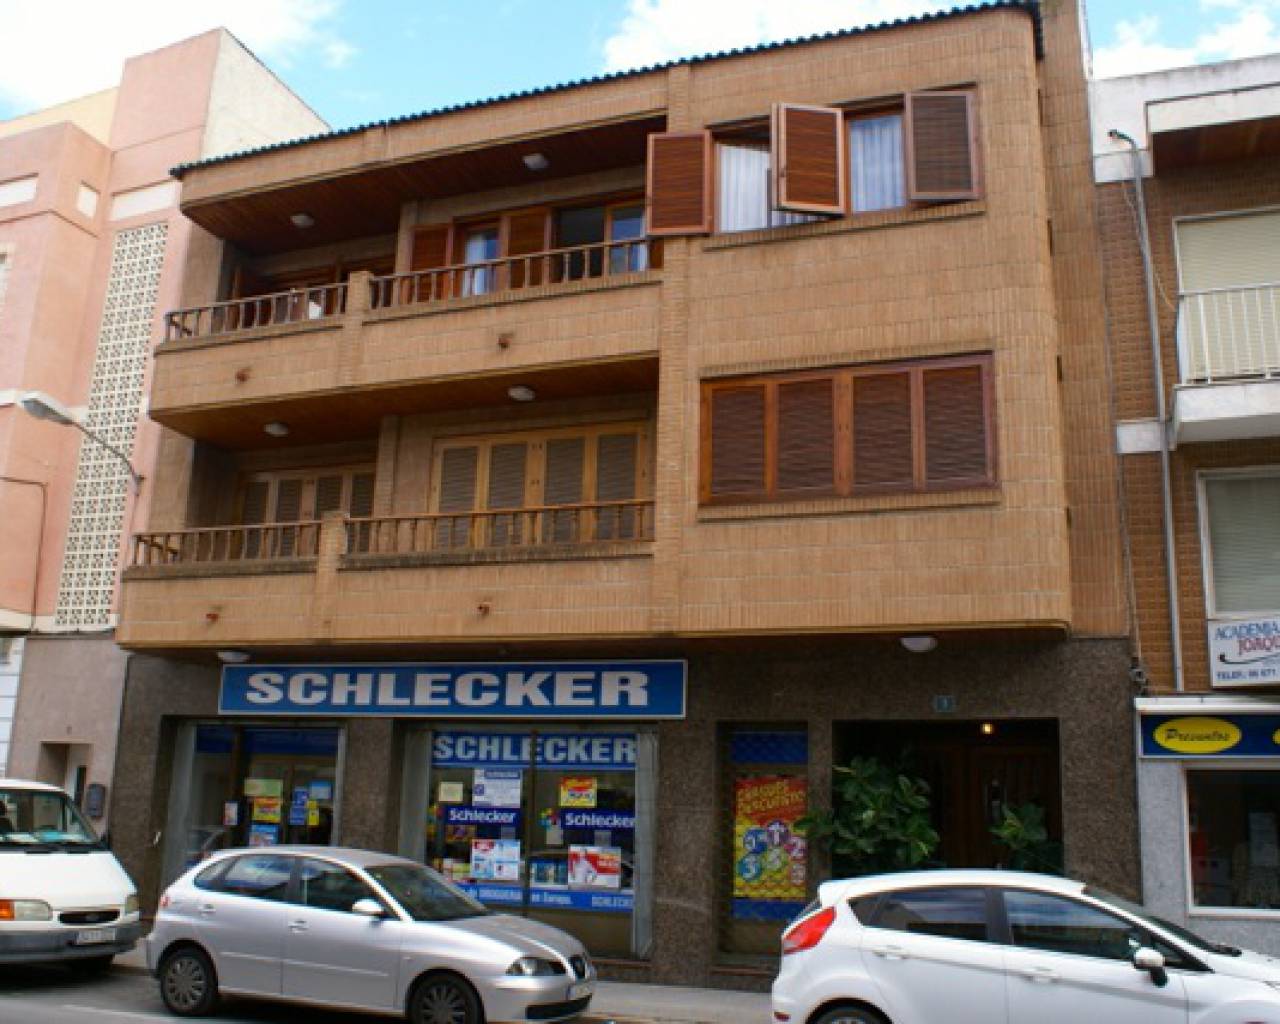 For sale: 3 bedroom apartment / flat in Rojales